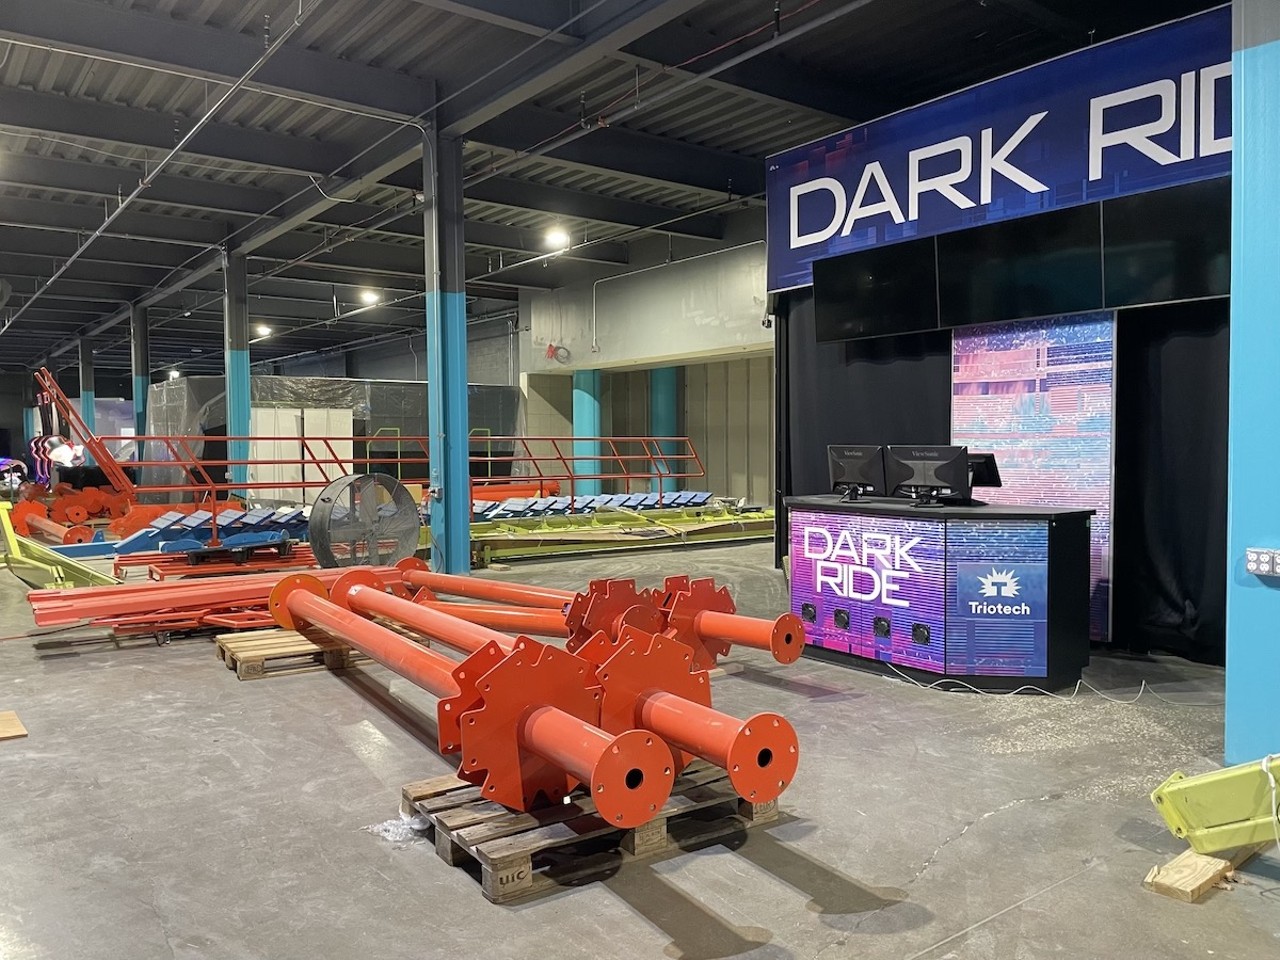 Photos: A look at progress on Tampa’s Elev8 Fun indoor amusement park opening in Citrus Park this summer